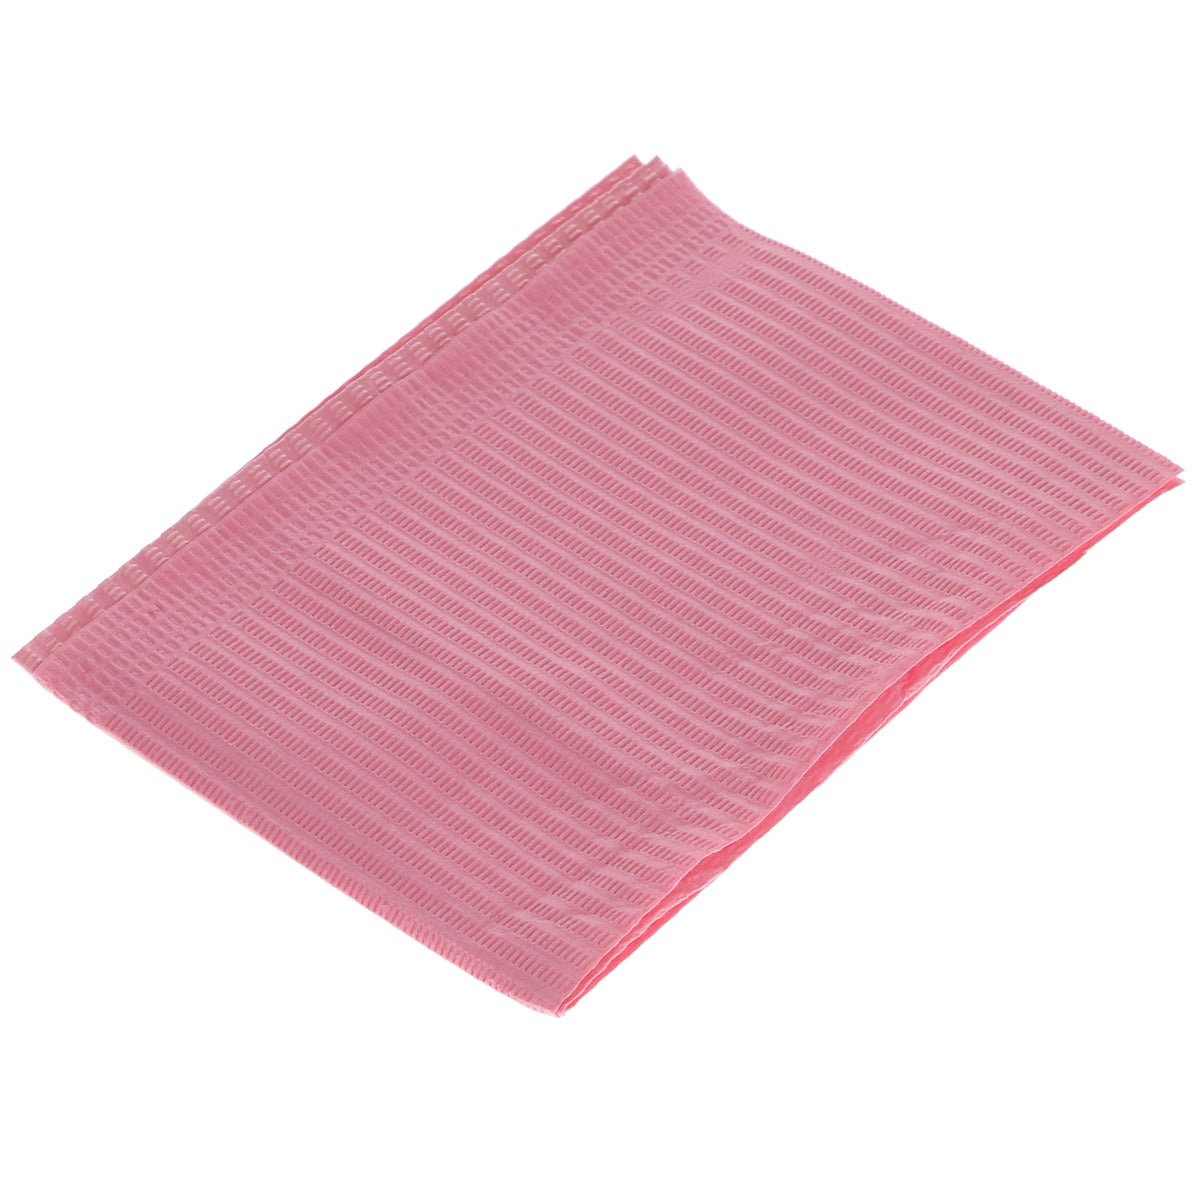 Disposable Dental Bibs, 13x19” 3ply, Case of 500